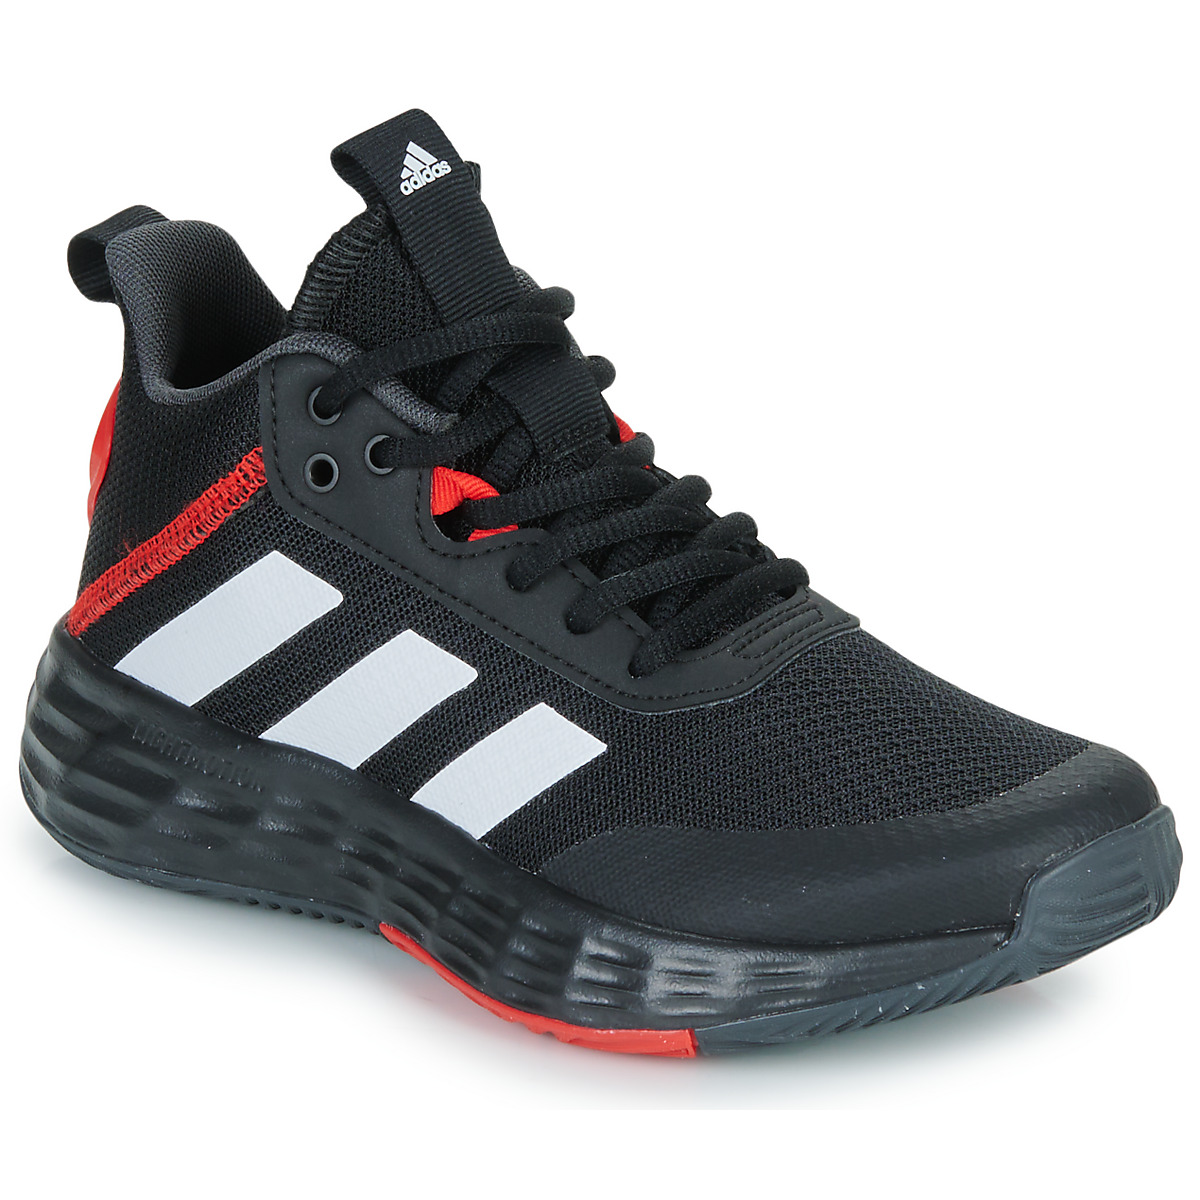 Chaussures Enfant adidas ace zones ultimate glove 2017 OWNTHEGAME 2.0 K Noir / Rouge